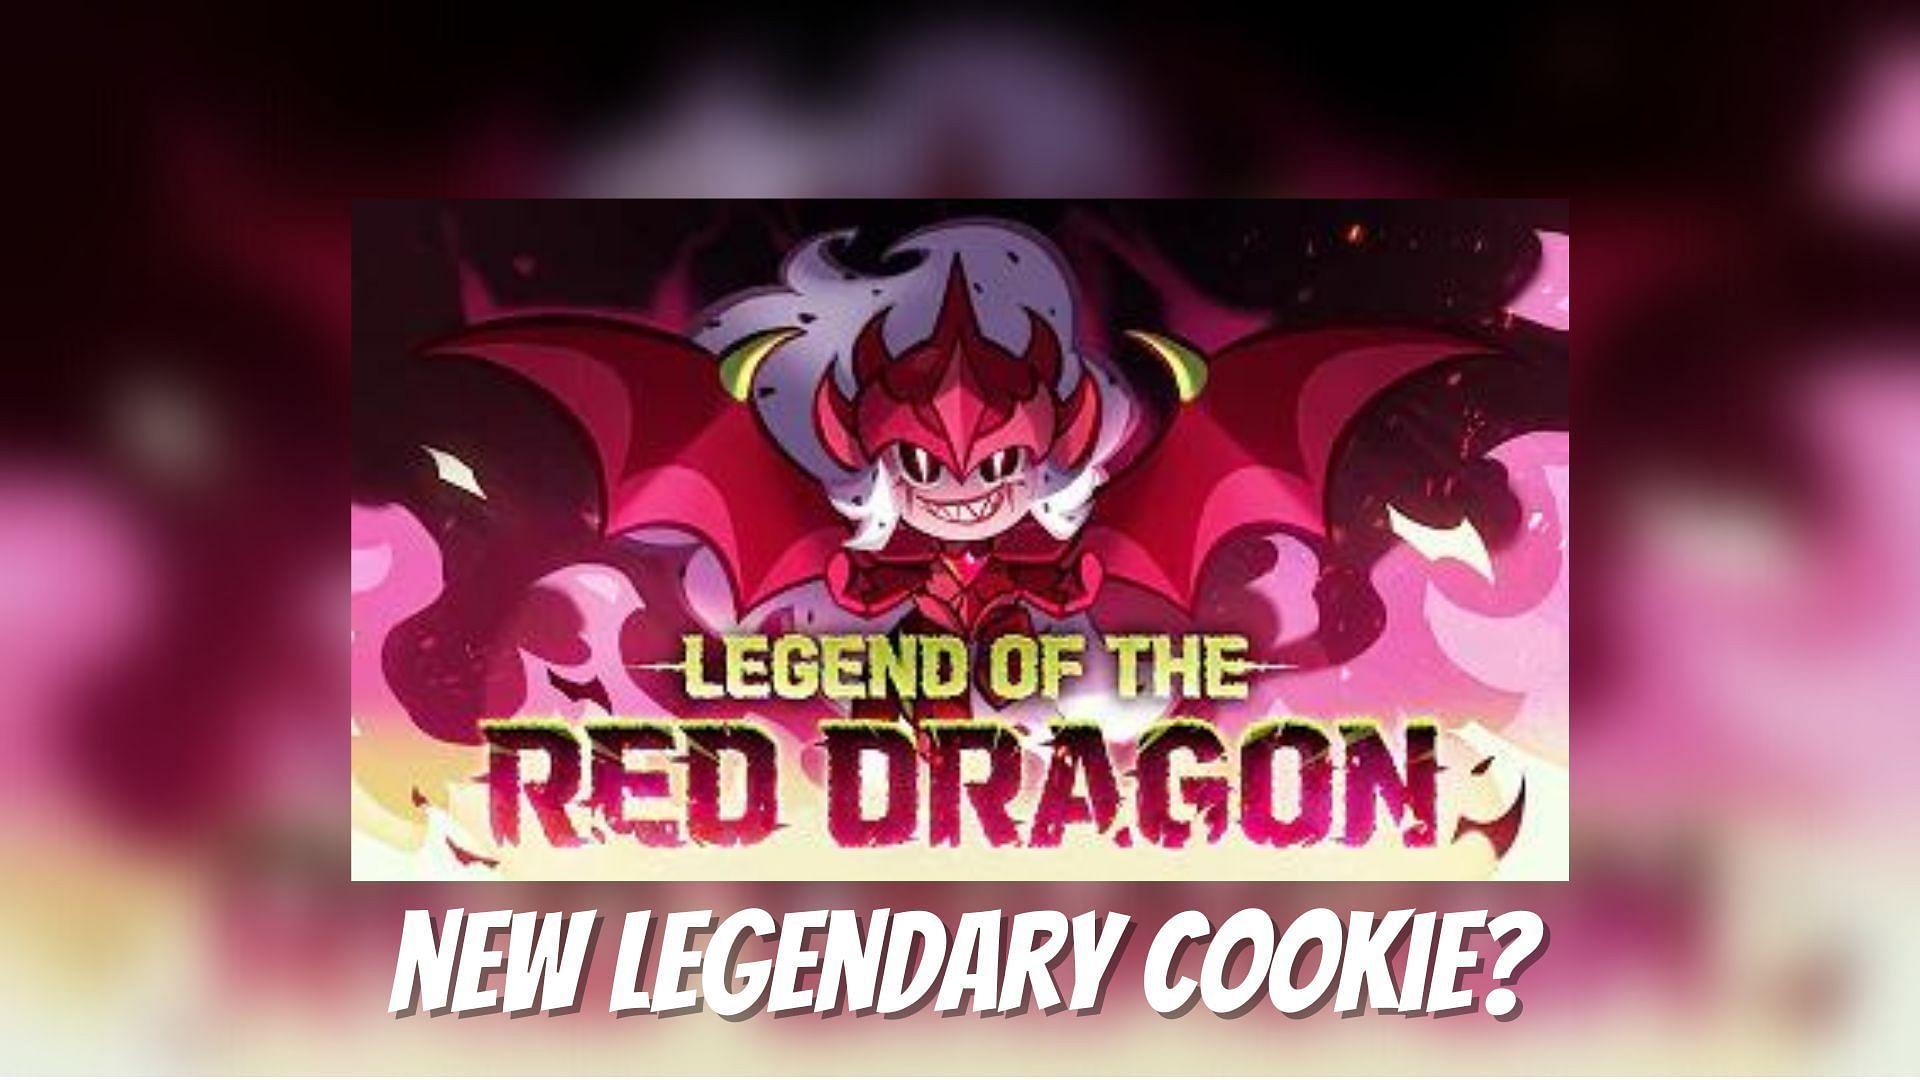 Pitaya Dragon is a Legendary Cookie in CRK